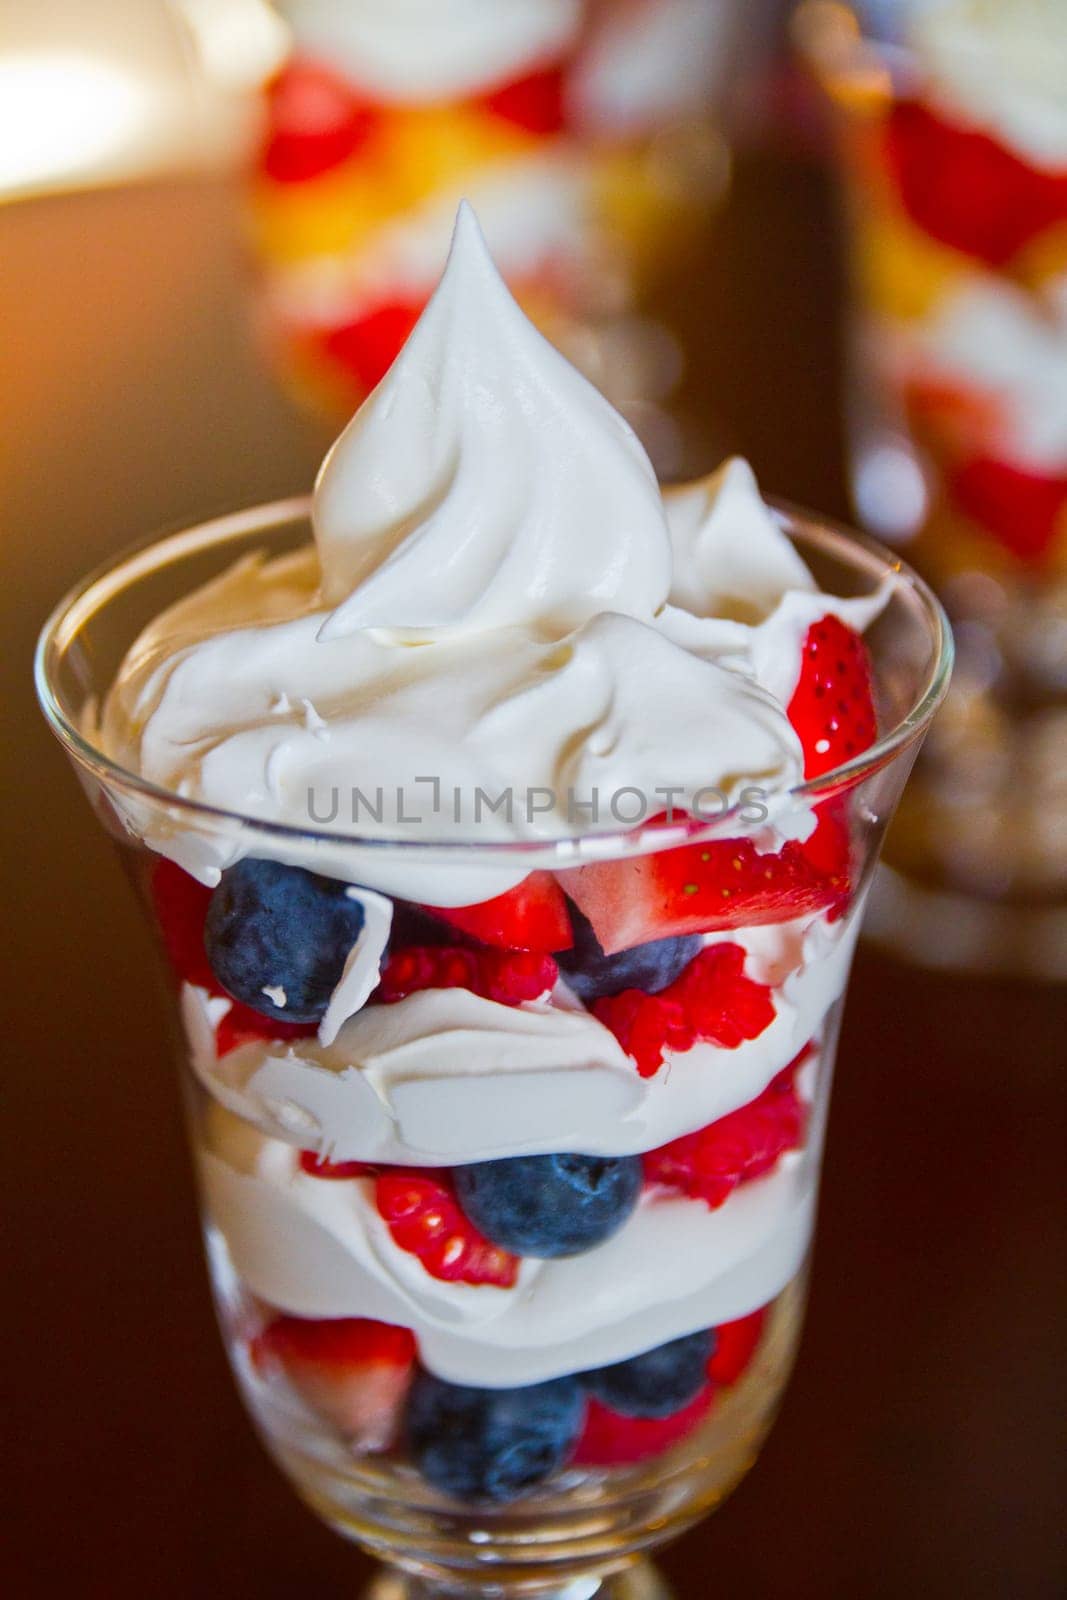 Close-up of Layered Berry and Cream Dessert in Warm Natural Light by njproductions